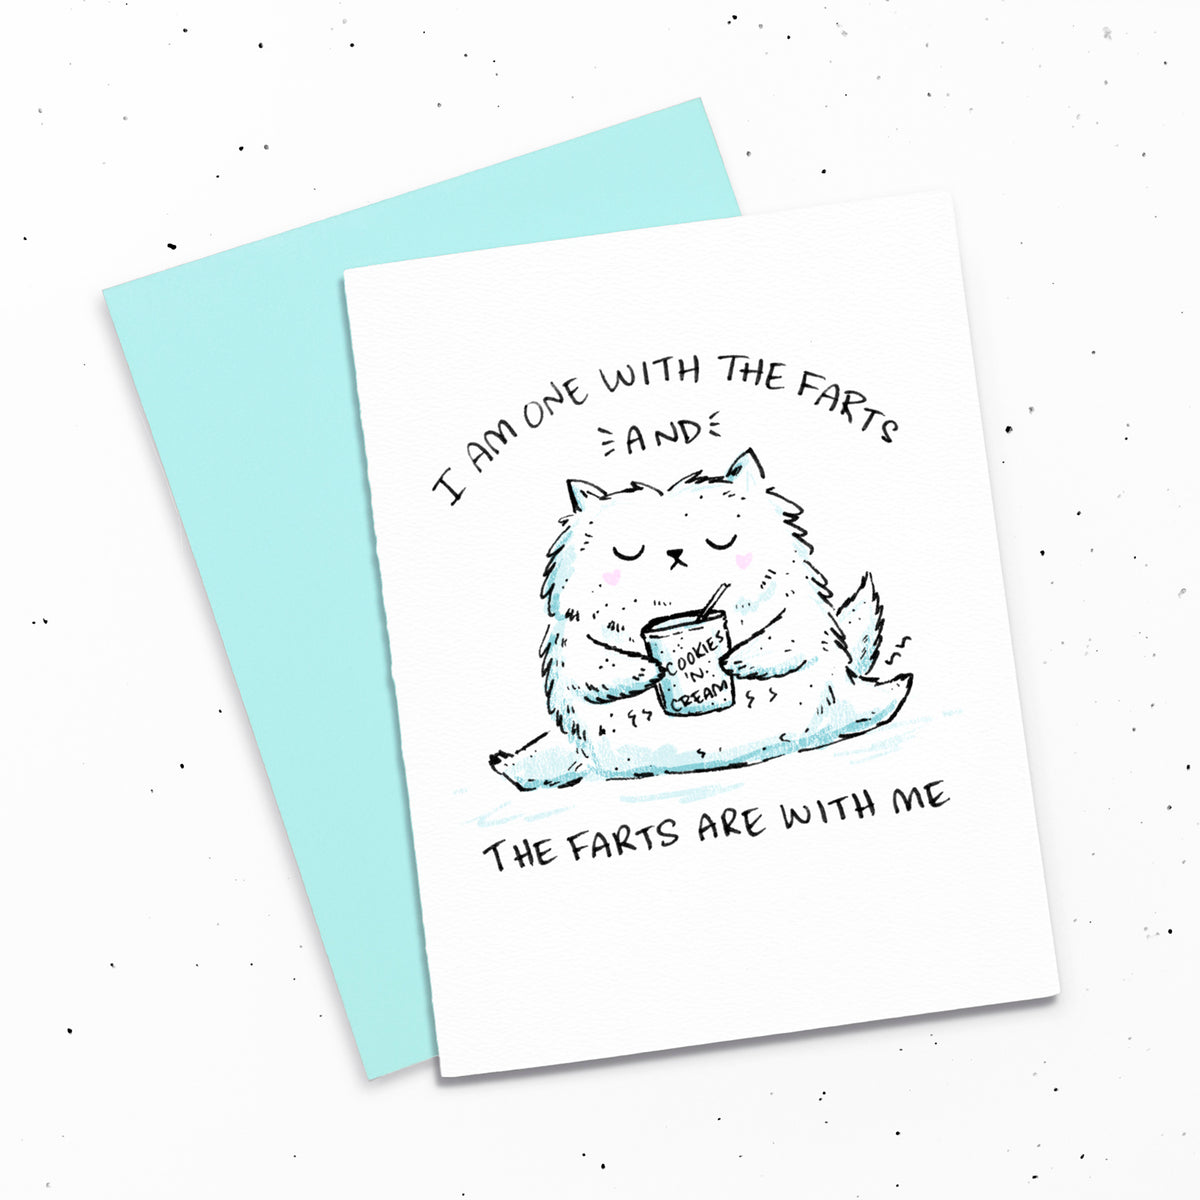 I Am One With The Farts And The Farts Are With Me - Greeting card with a drawing of a cat eating ice cream and farting. Lactard.